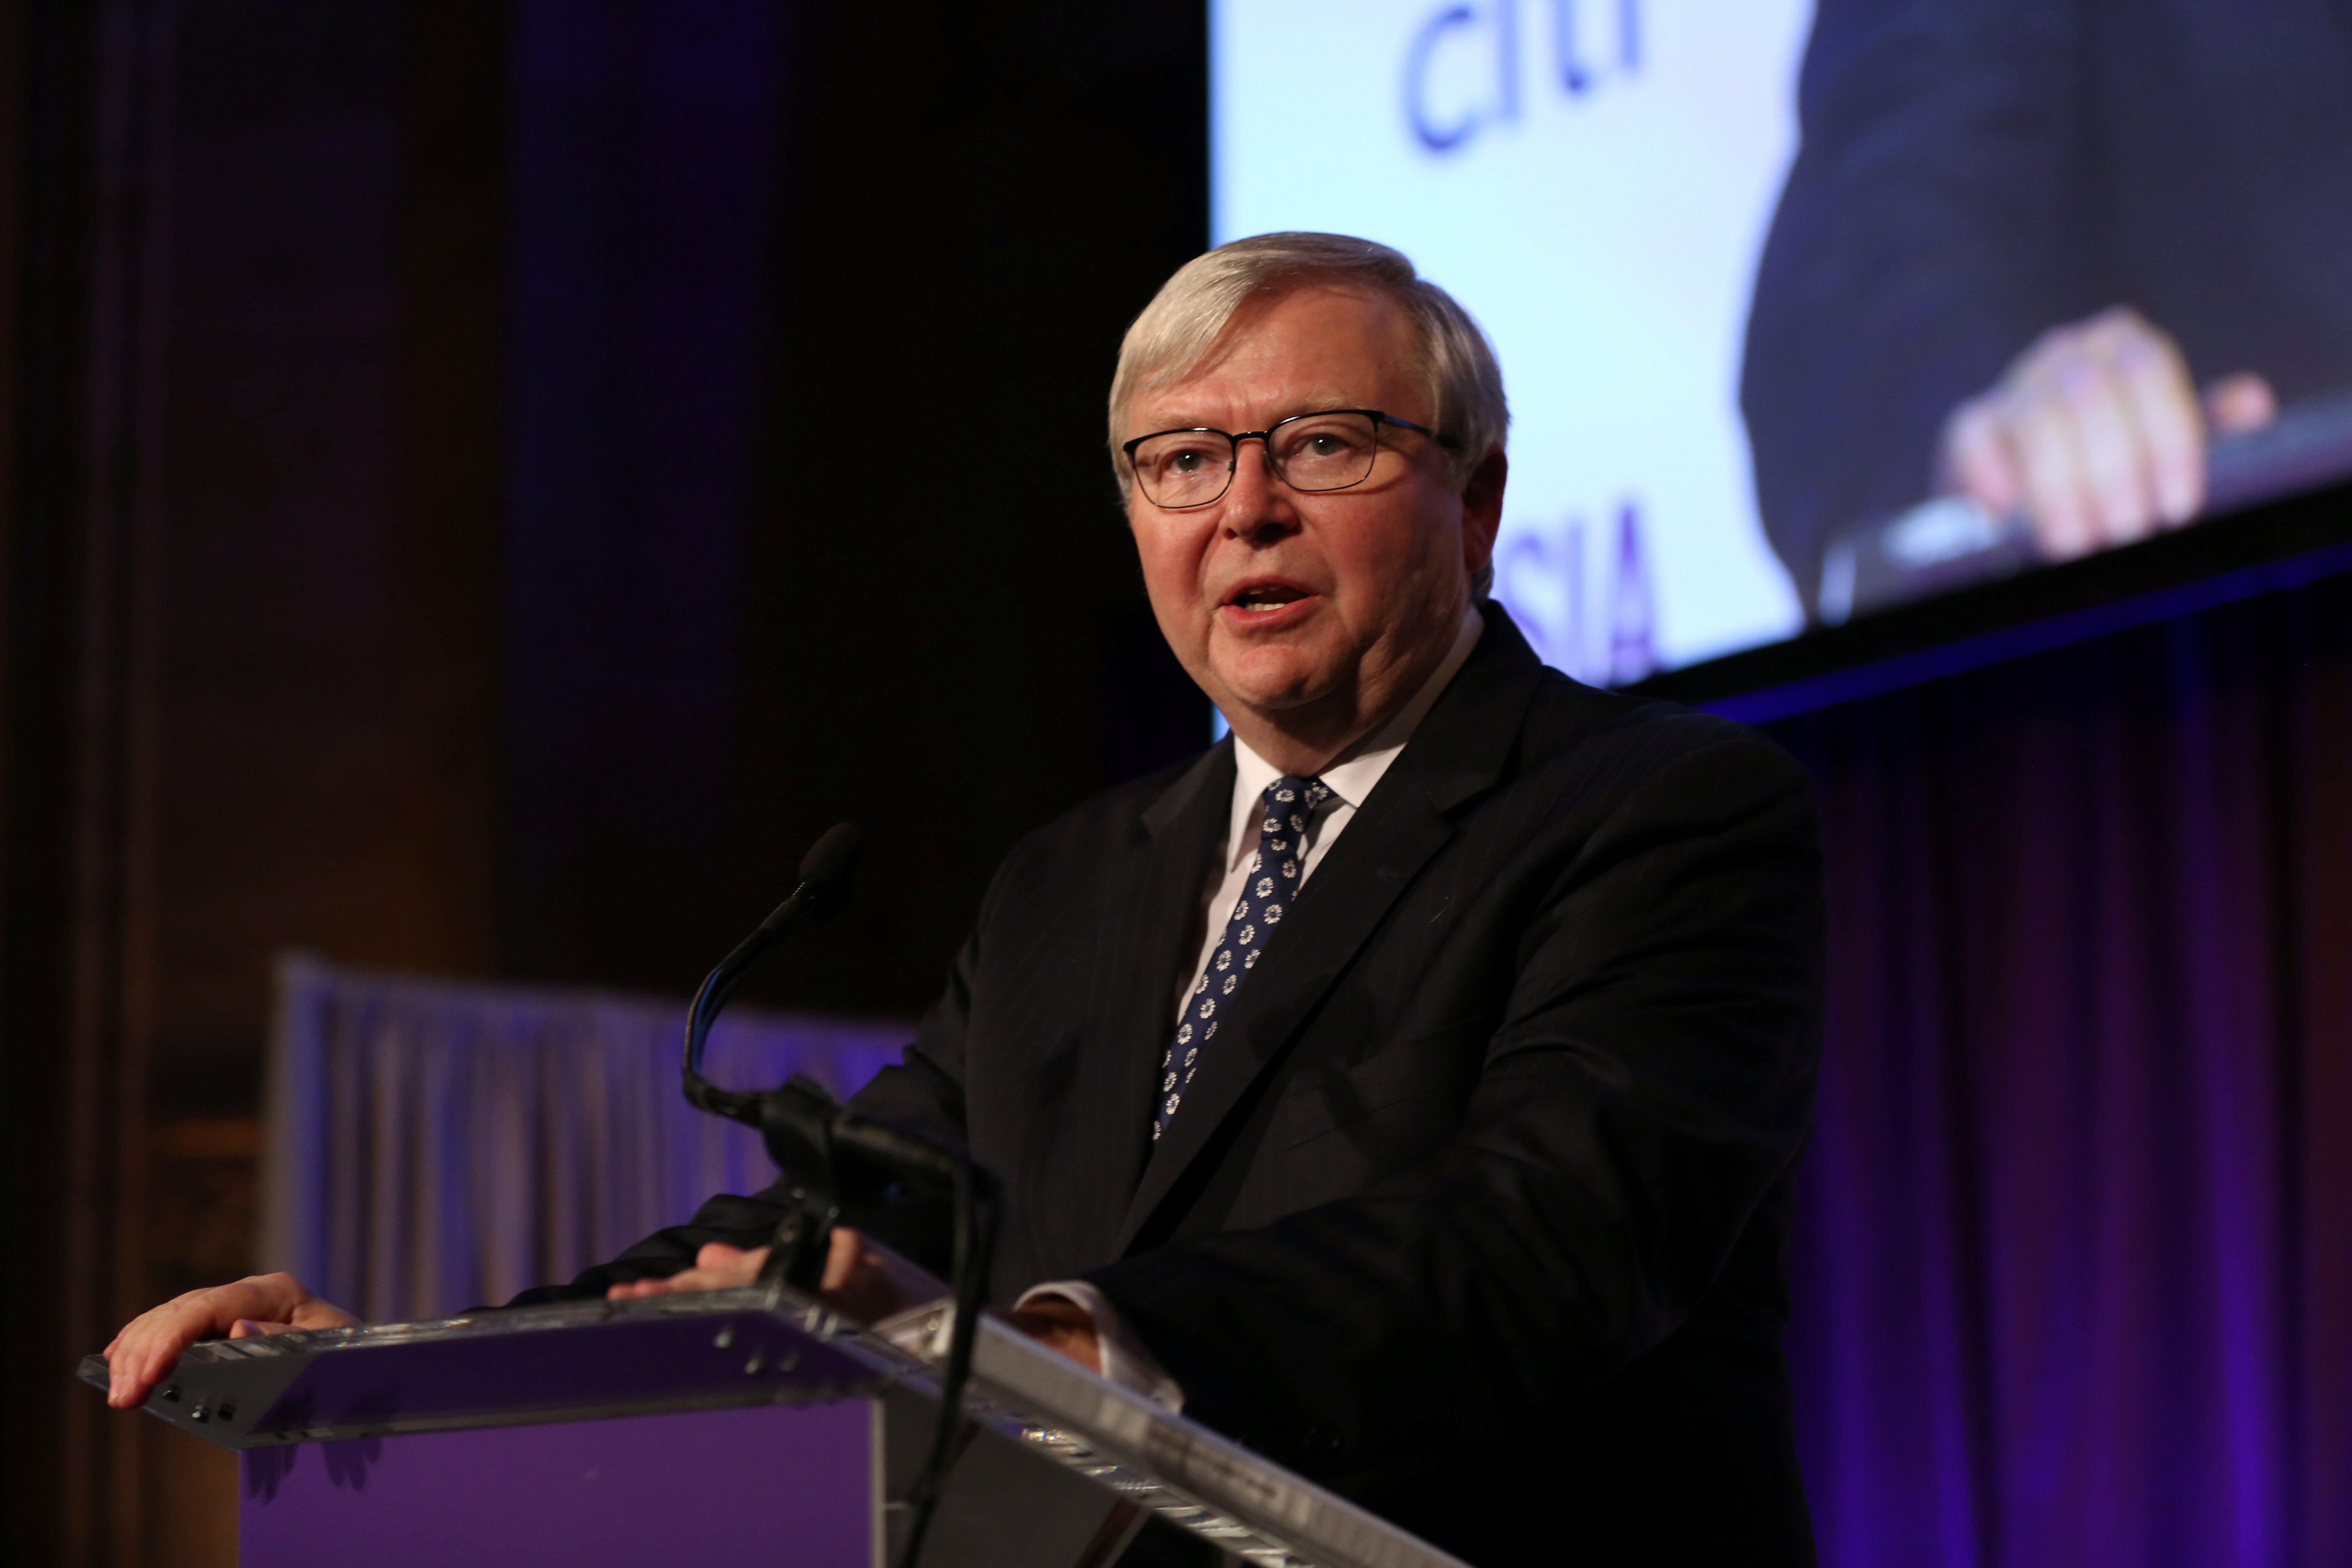 Former Australian Prime Minister and ASPI President Rudd gives a speech during the 2017 Asia Game Changer Awards and Gala Dinner in New York